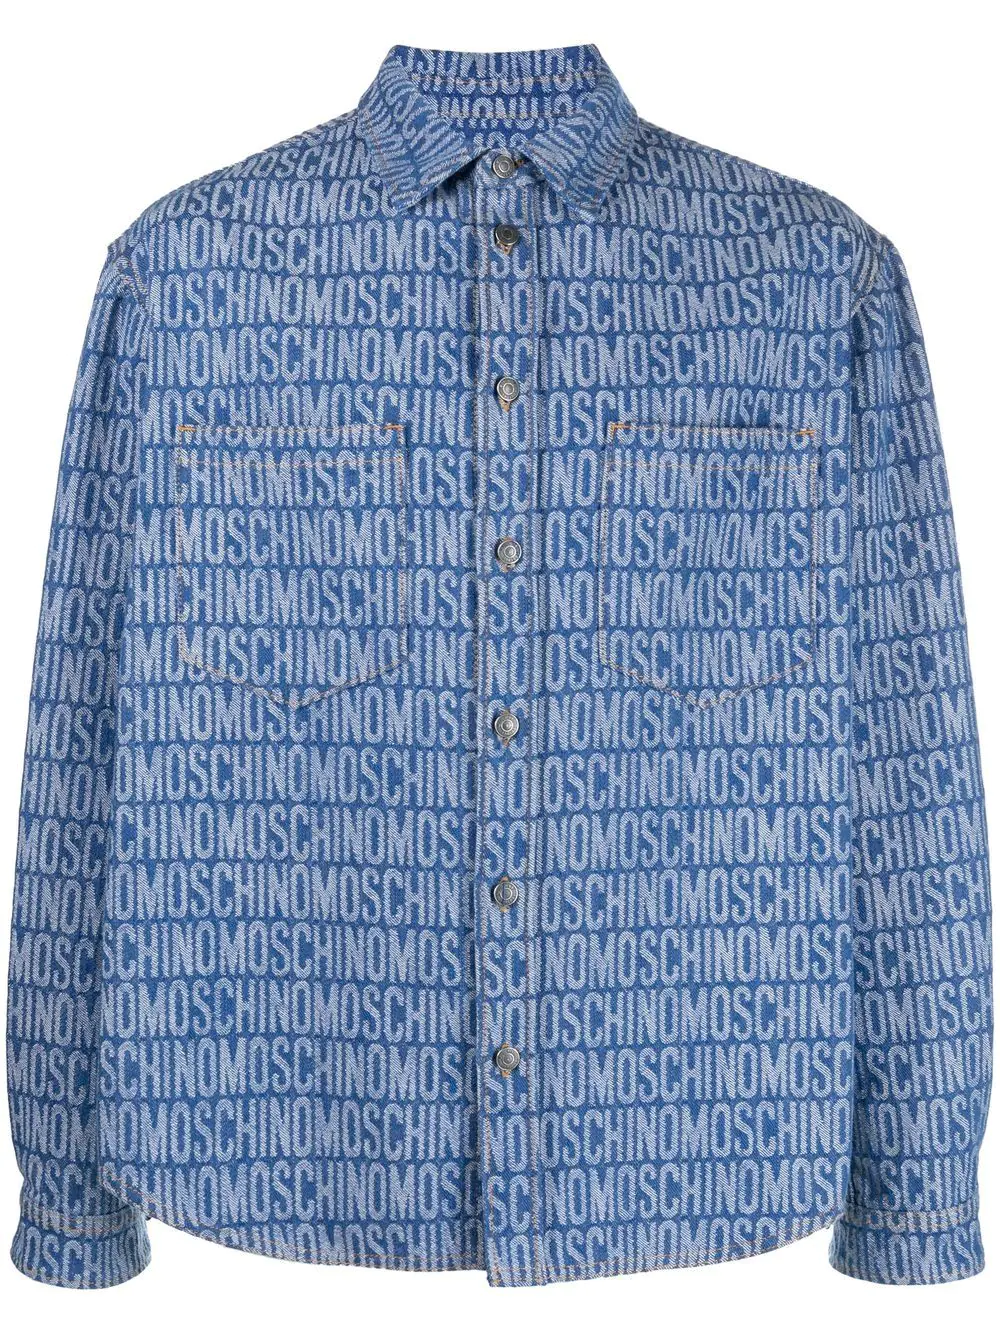 moschino Denim shirt with monogram available on  -  25811 - MO